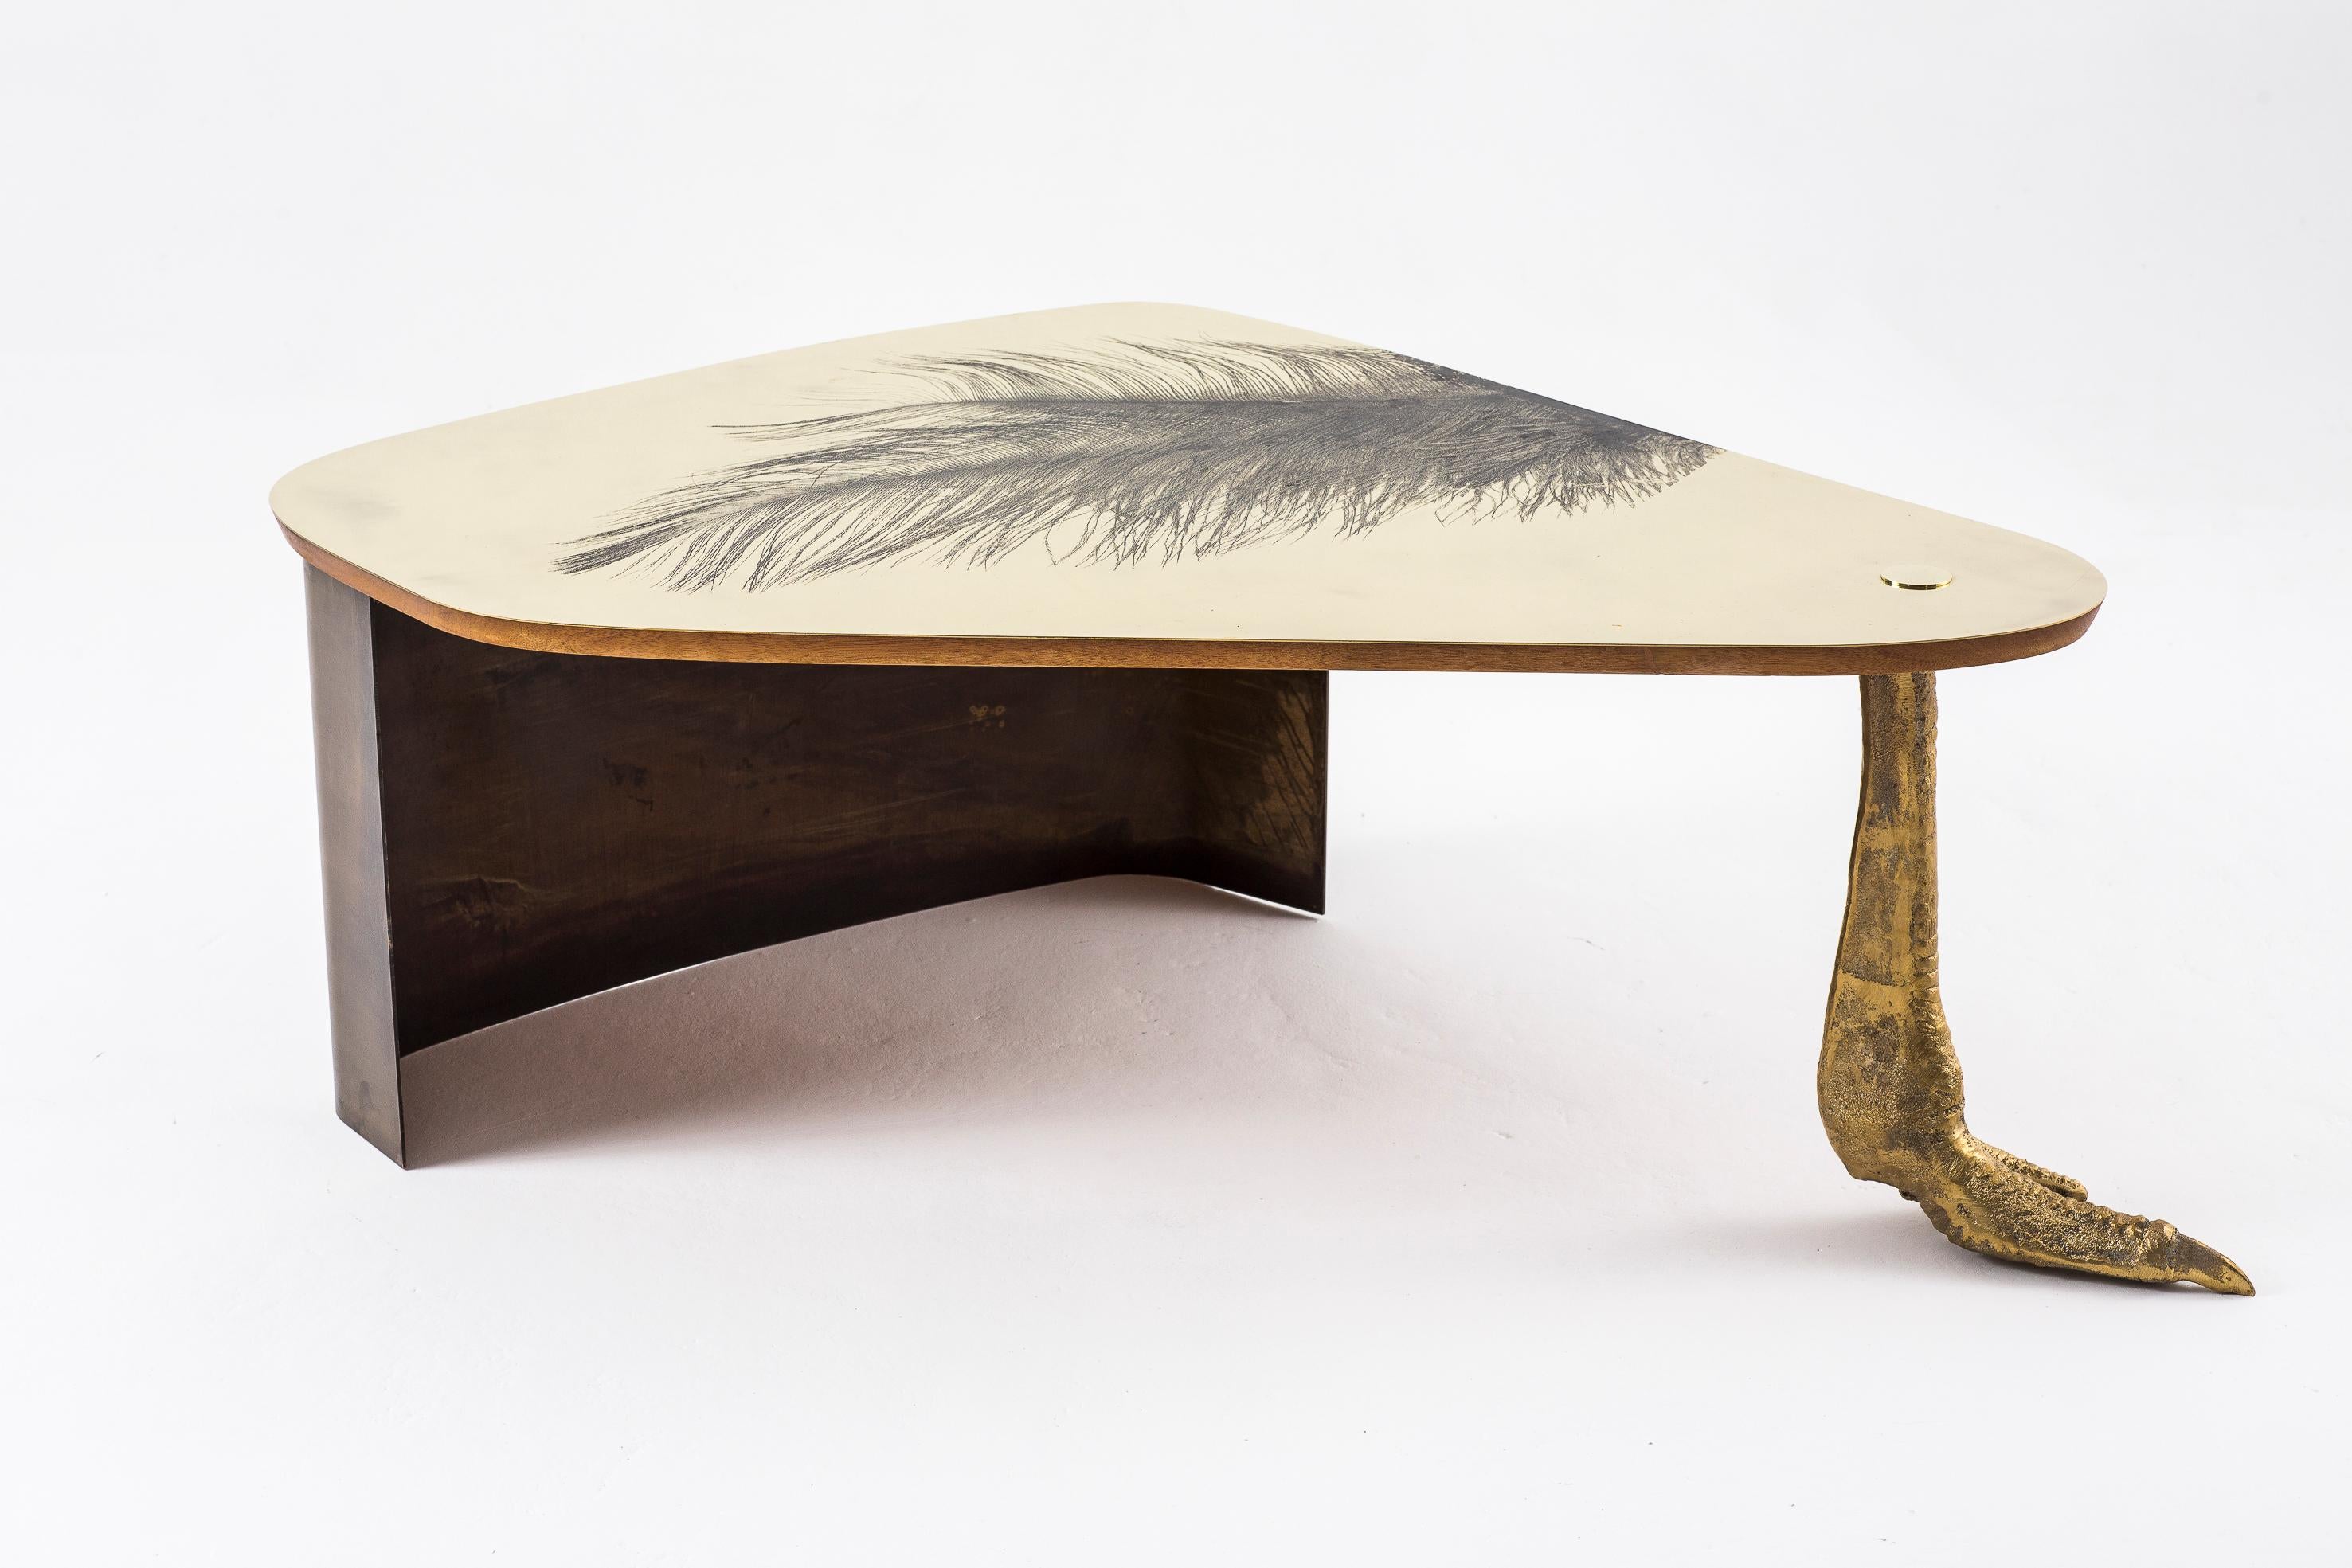 Ostrich Foot coffee table by Egg Designs
Dimensions: 120 L X 86 D X 43 H cm
Materials: Sand Cast Solid Brass, Etched Brass Sheet, Timber

Founded by South Africans and life partners, Greg and Roche Dry - Egg is a unique perspective in